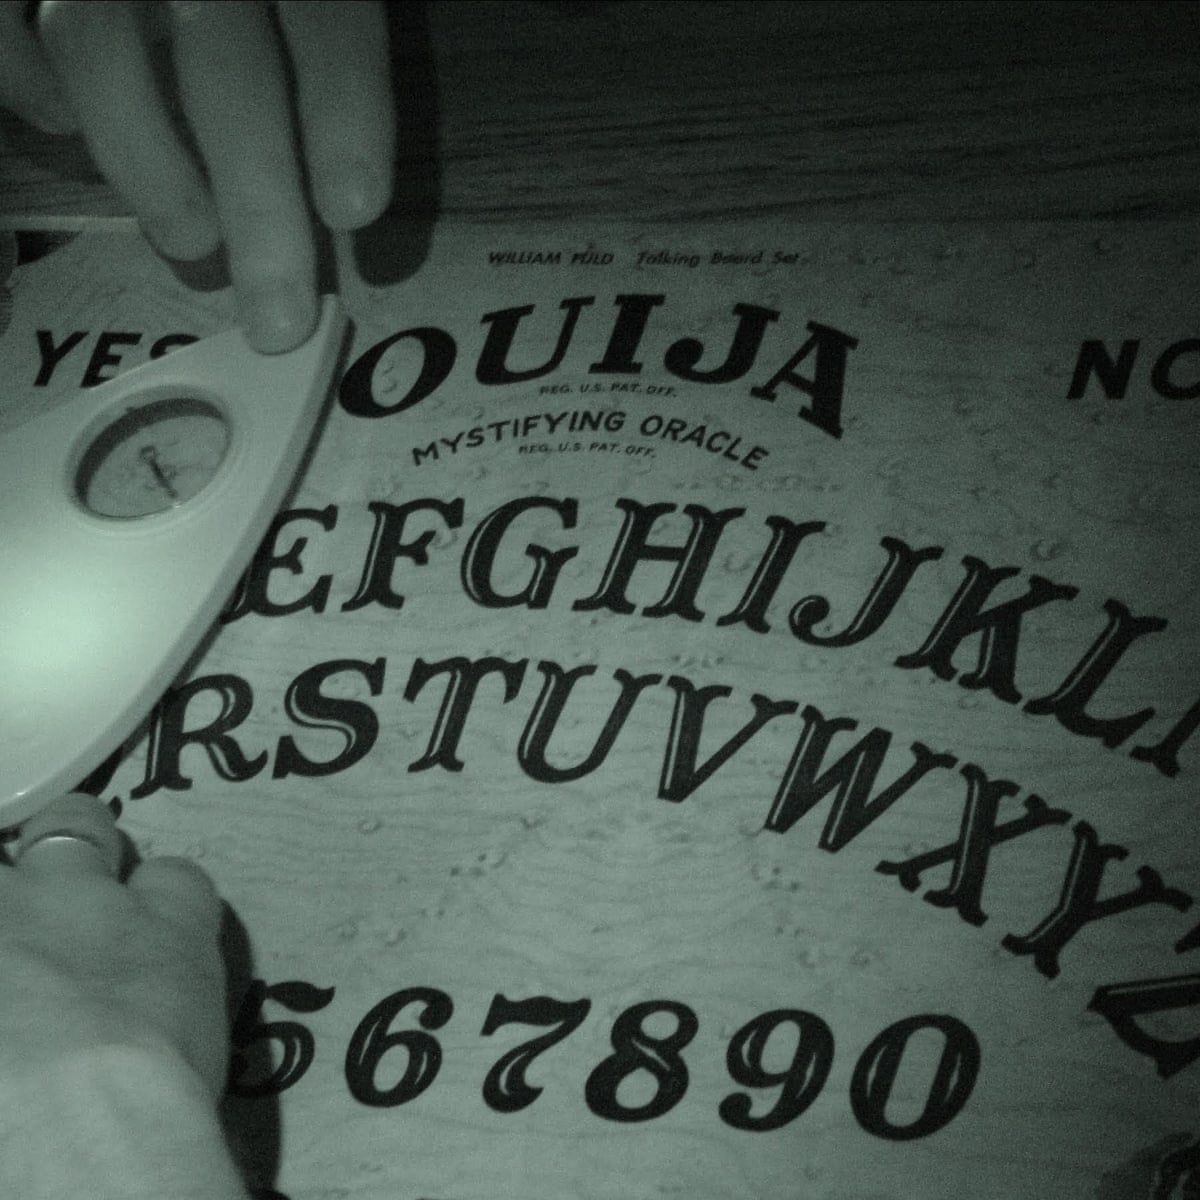 Bat deliver reign The Ouija board's mysterious origins: war, spirits, and a strange death |  Life and style | The Guardian